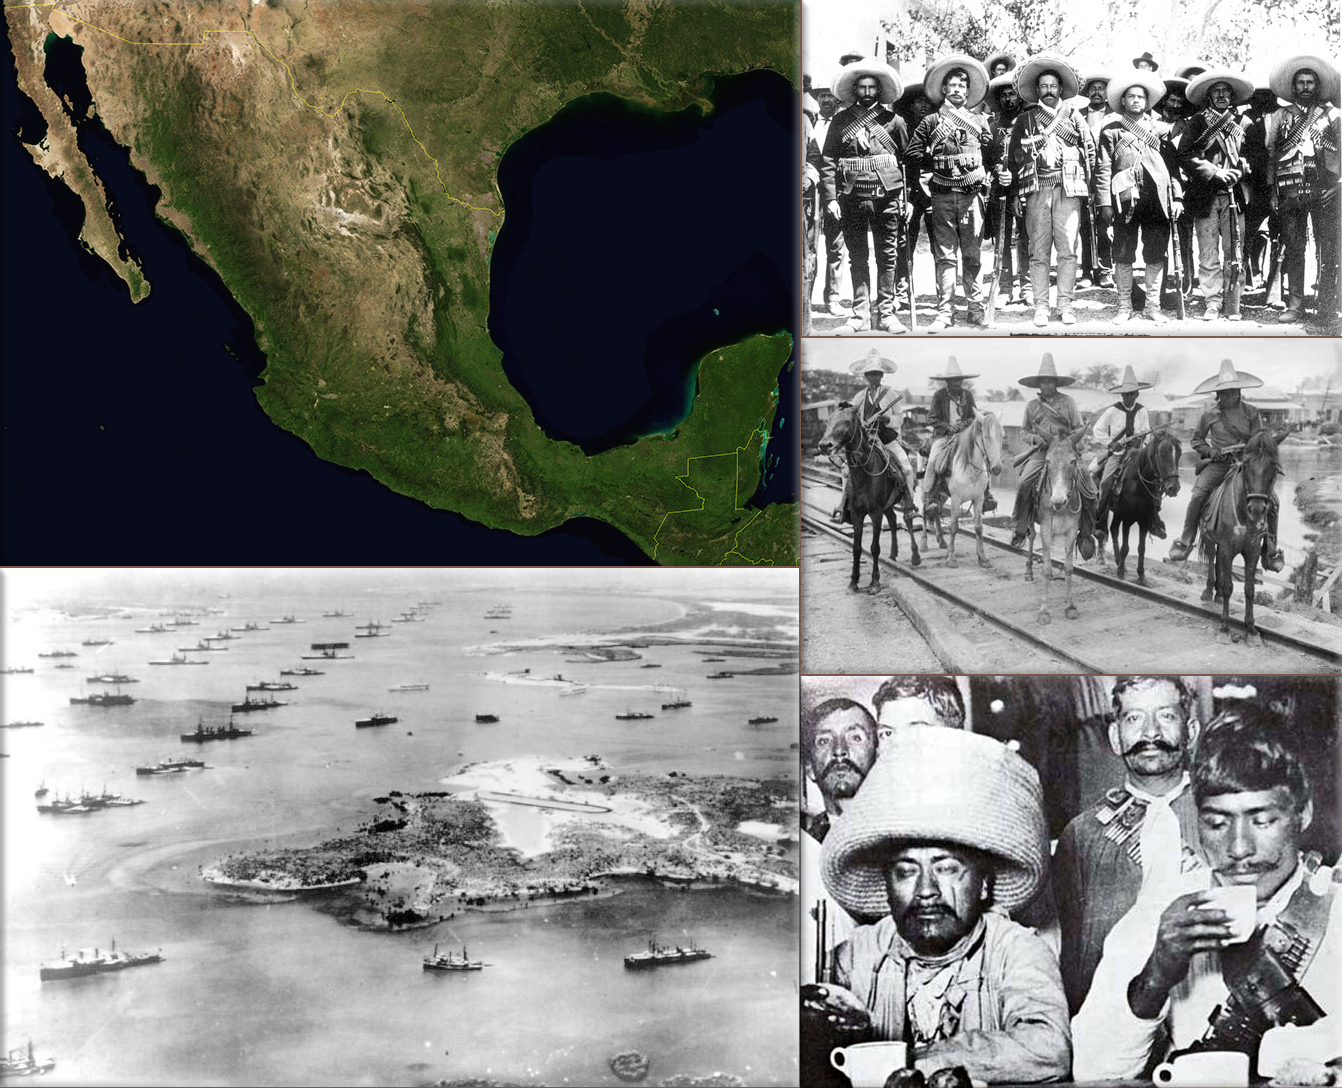 Mexican Revolution Collage: (Spanish: Revolución mexicana) was a major armed struggle that started in 1910, with an uprising led by Francisco I. Madero against longtime autocrat Porfirio Díaz, and lasted for the better part of a decade until around 1920